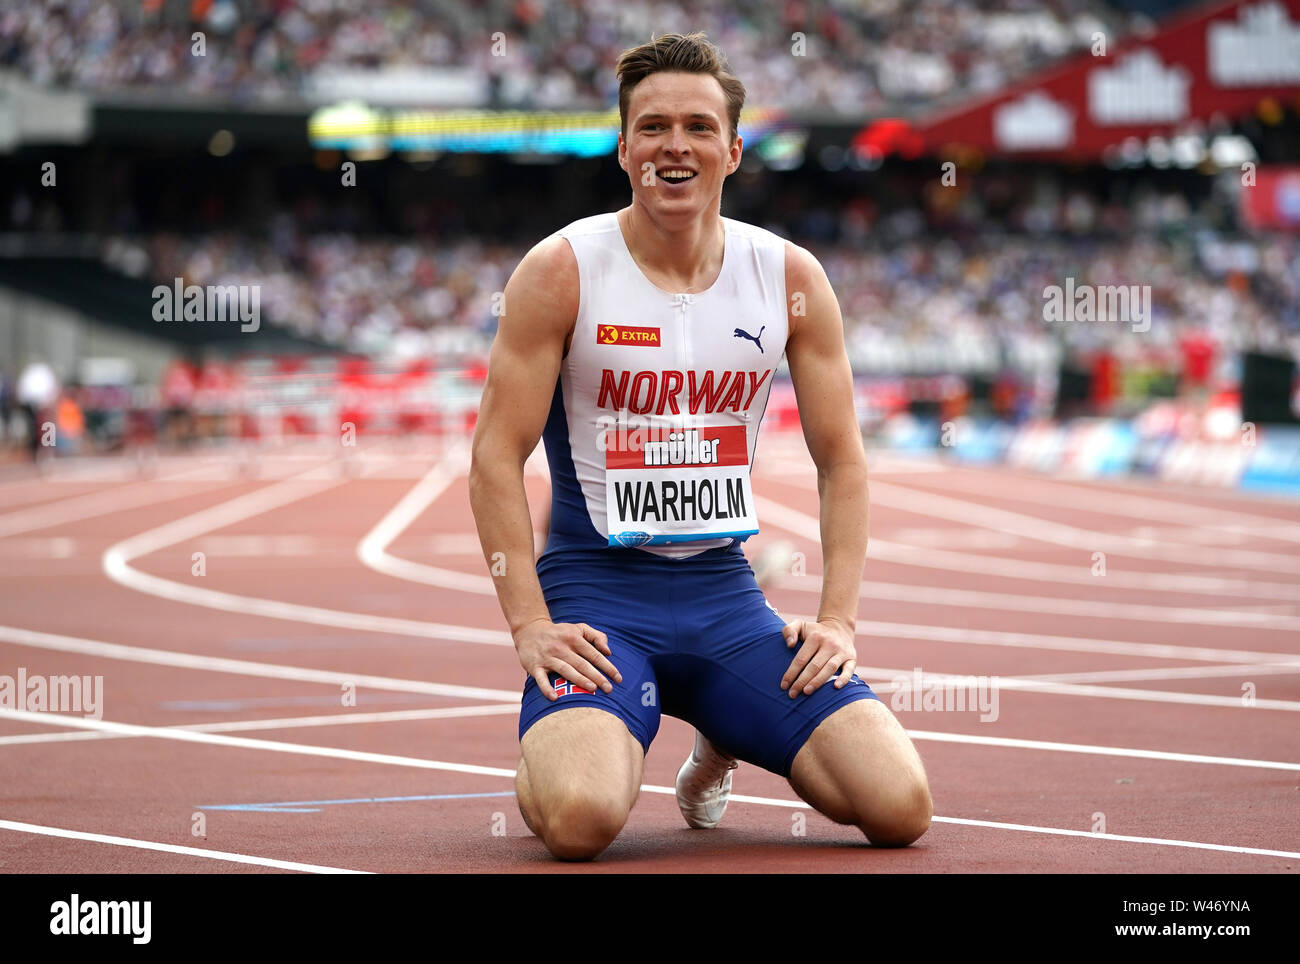 Norway S Karsten Warholm Reacts After Taking First Place In The Men S 400m Hurdles Final During Day One Of The Iaaf London Diamond League Meet At The London Stadium Stock Photo Alamy